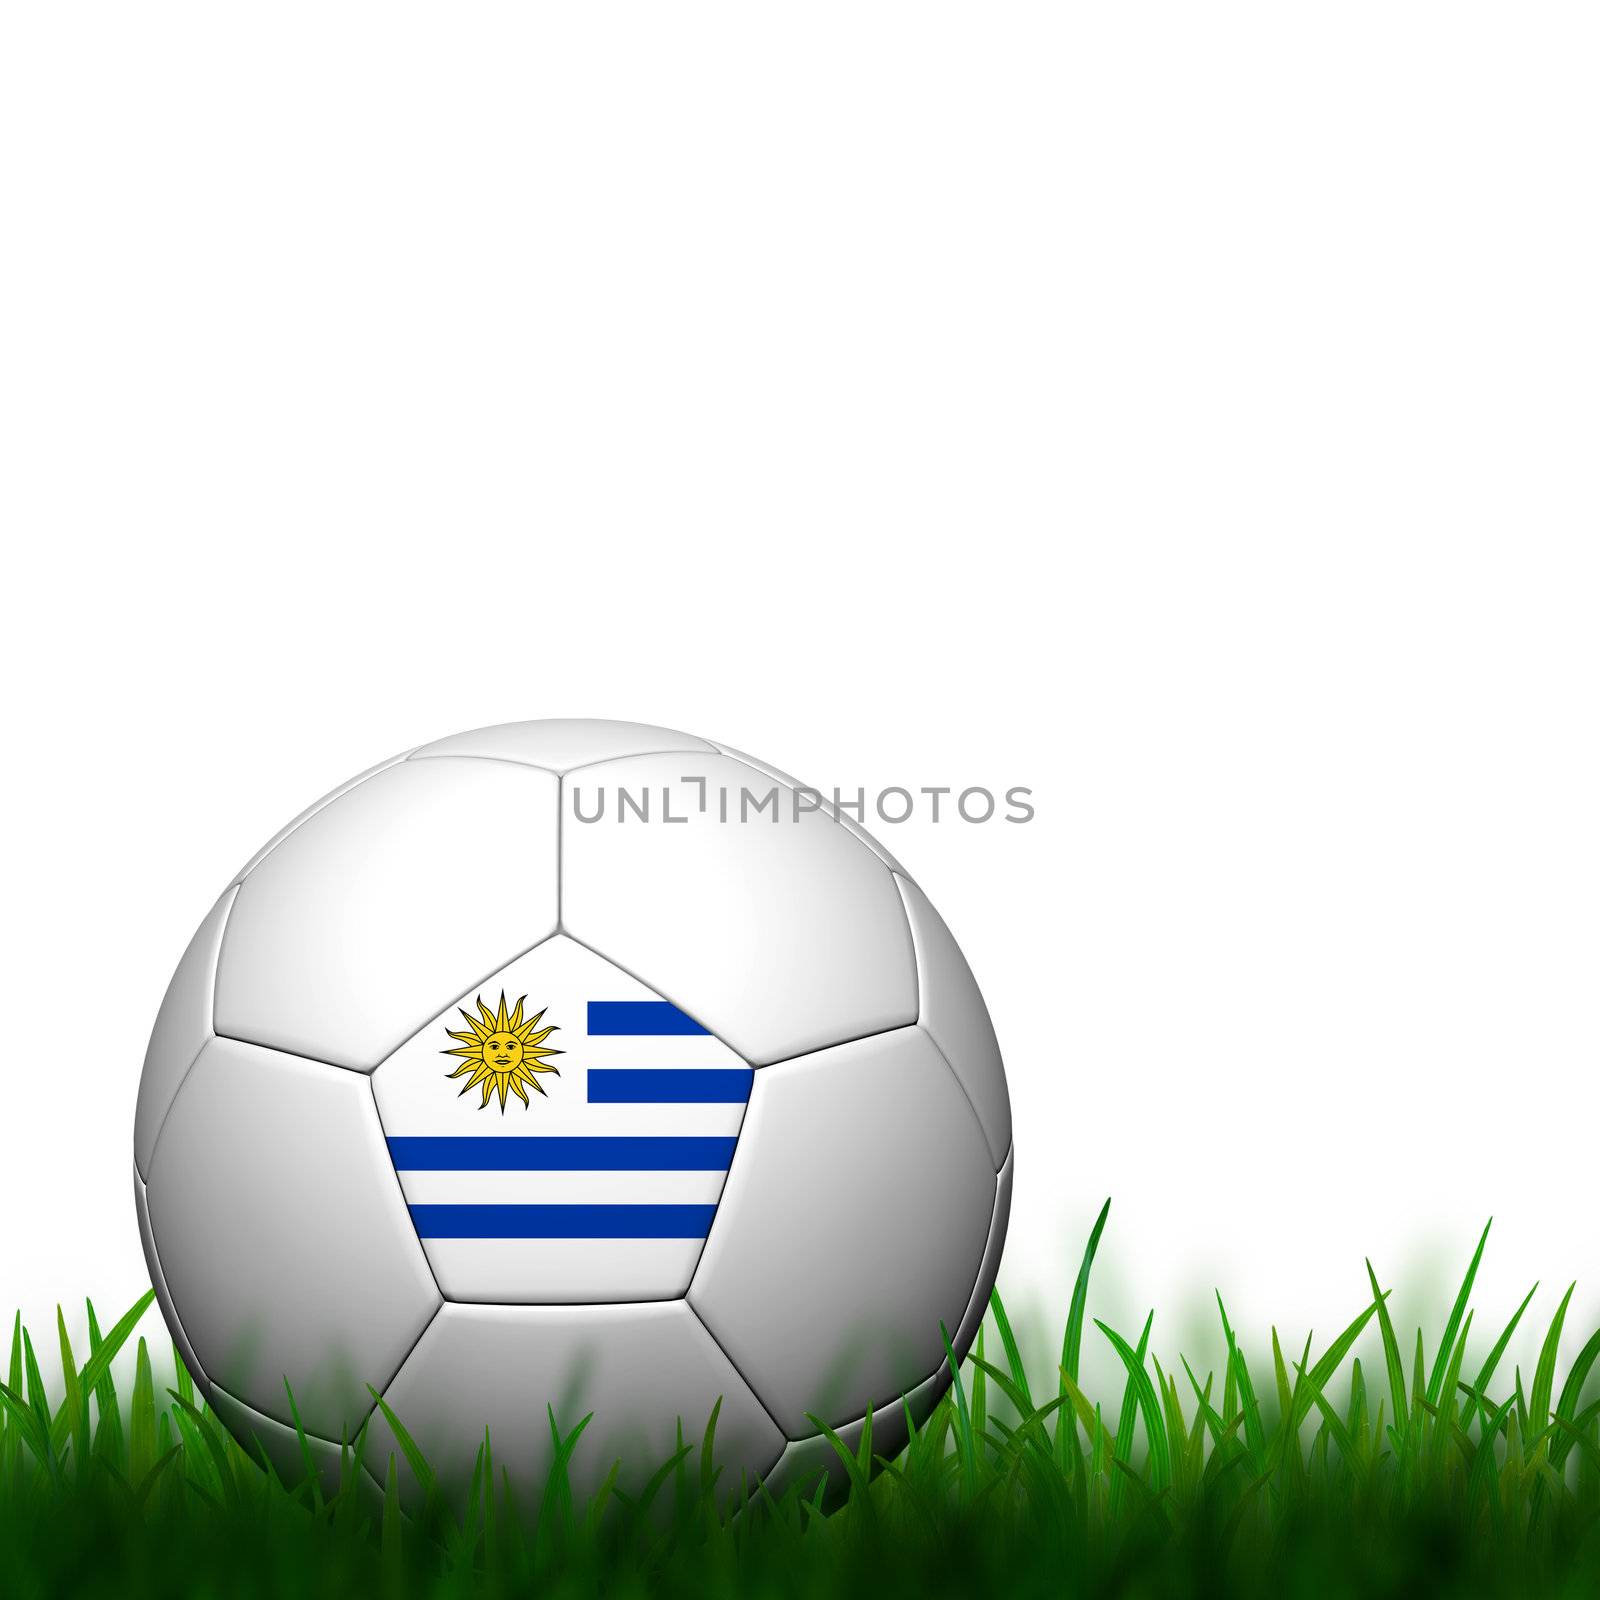 3D Football Uruguay Flag Patter in green grass on white background